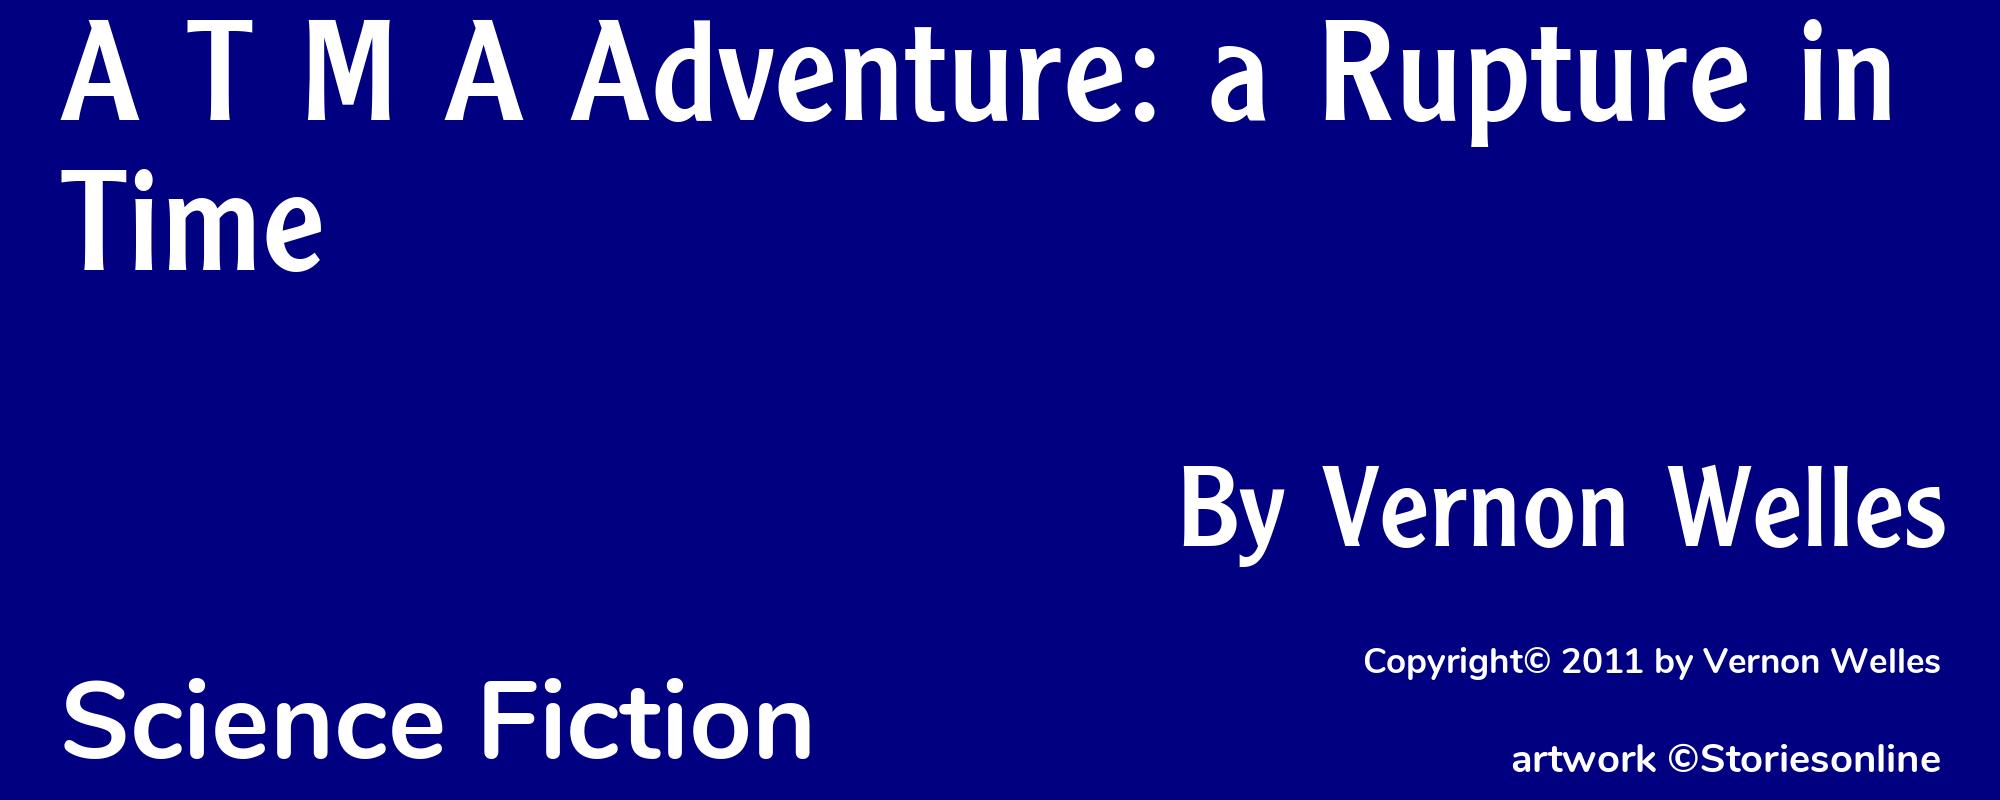 A T M A Adventure: a Rupture in Time - Cover